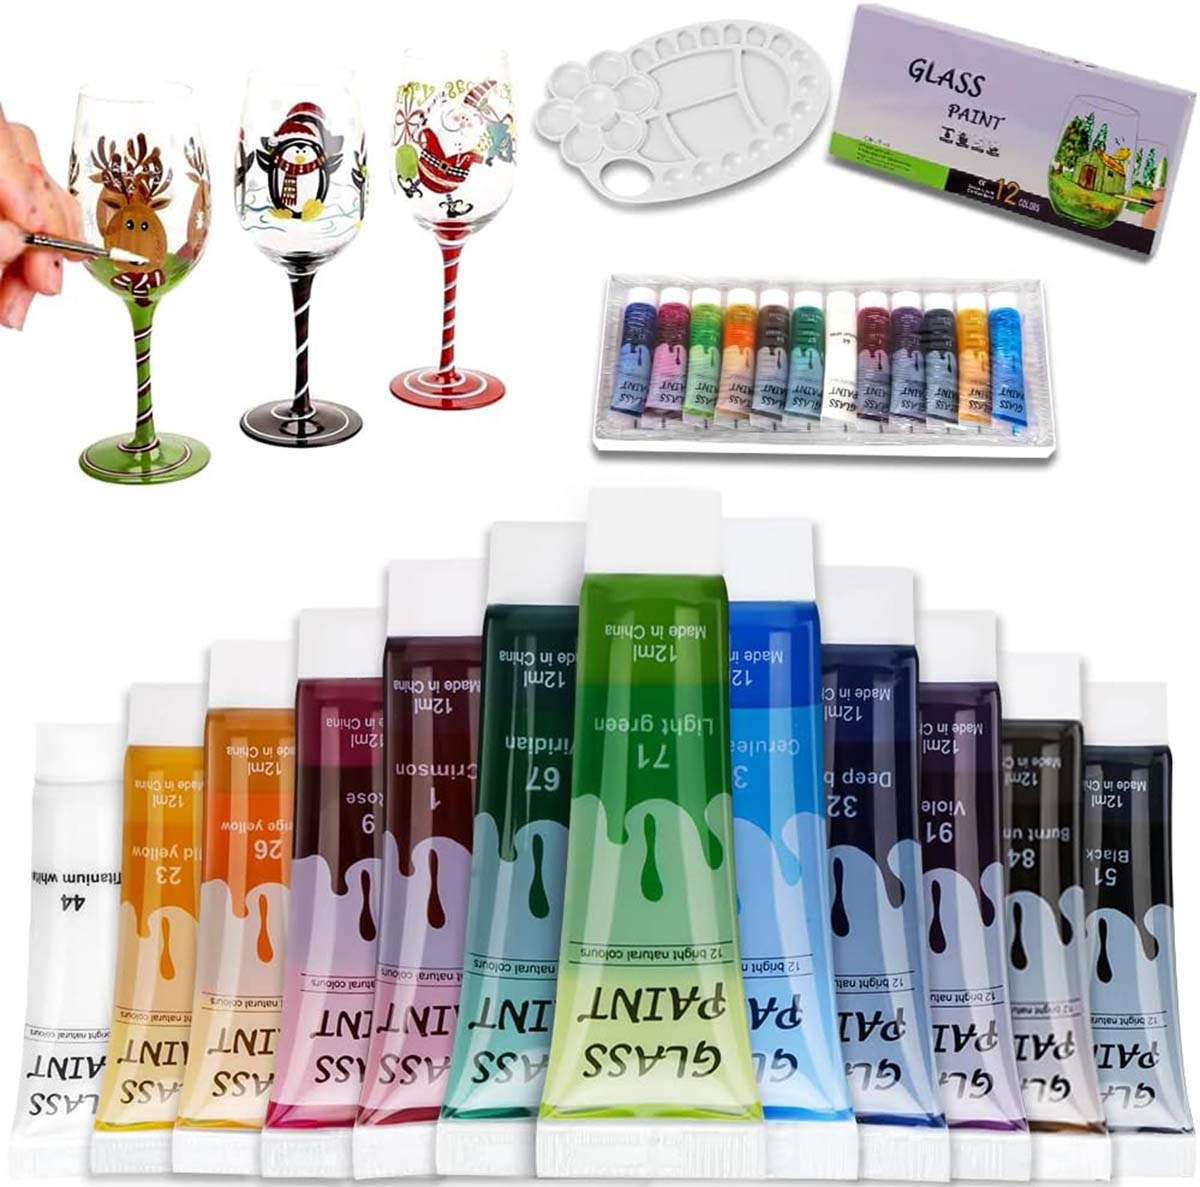  Superior Stained Glass Art Paint, Transparent & Translucent  Window Paint, Lacquer Based Stain Glass Paint with 9 Brushes